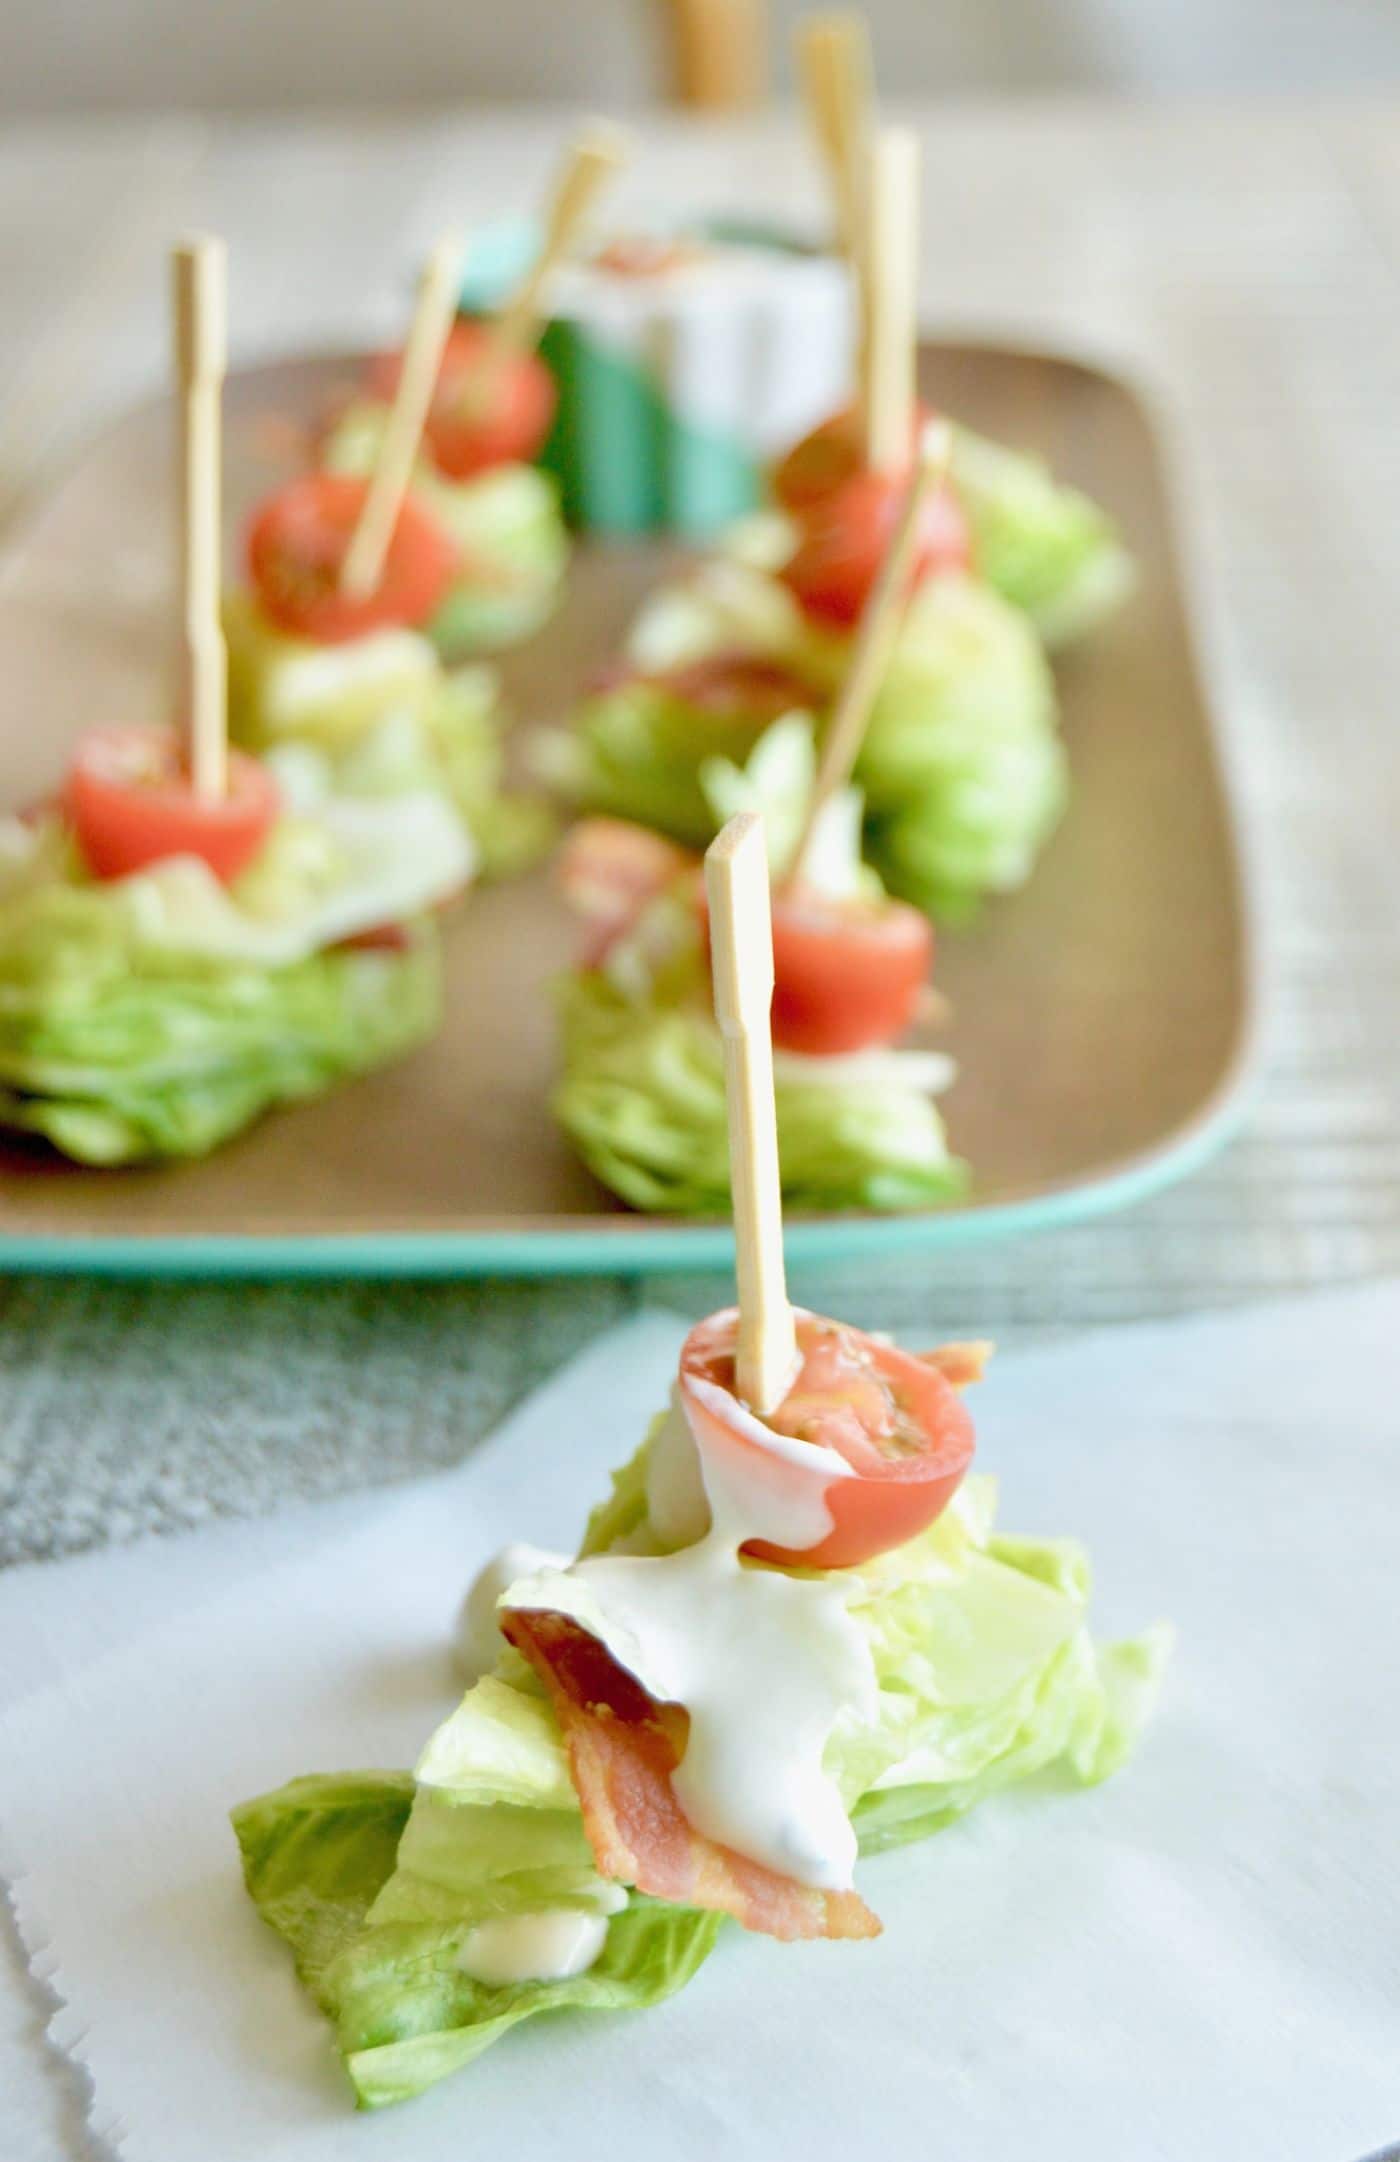 BLT's Salad Bites are a simple starter for any party.  They can be made ahead and just drizzled with homemade Blue Cheese Dressing at the last minute!